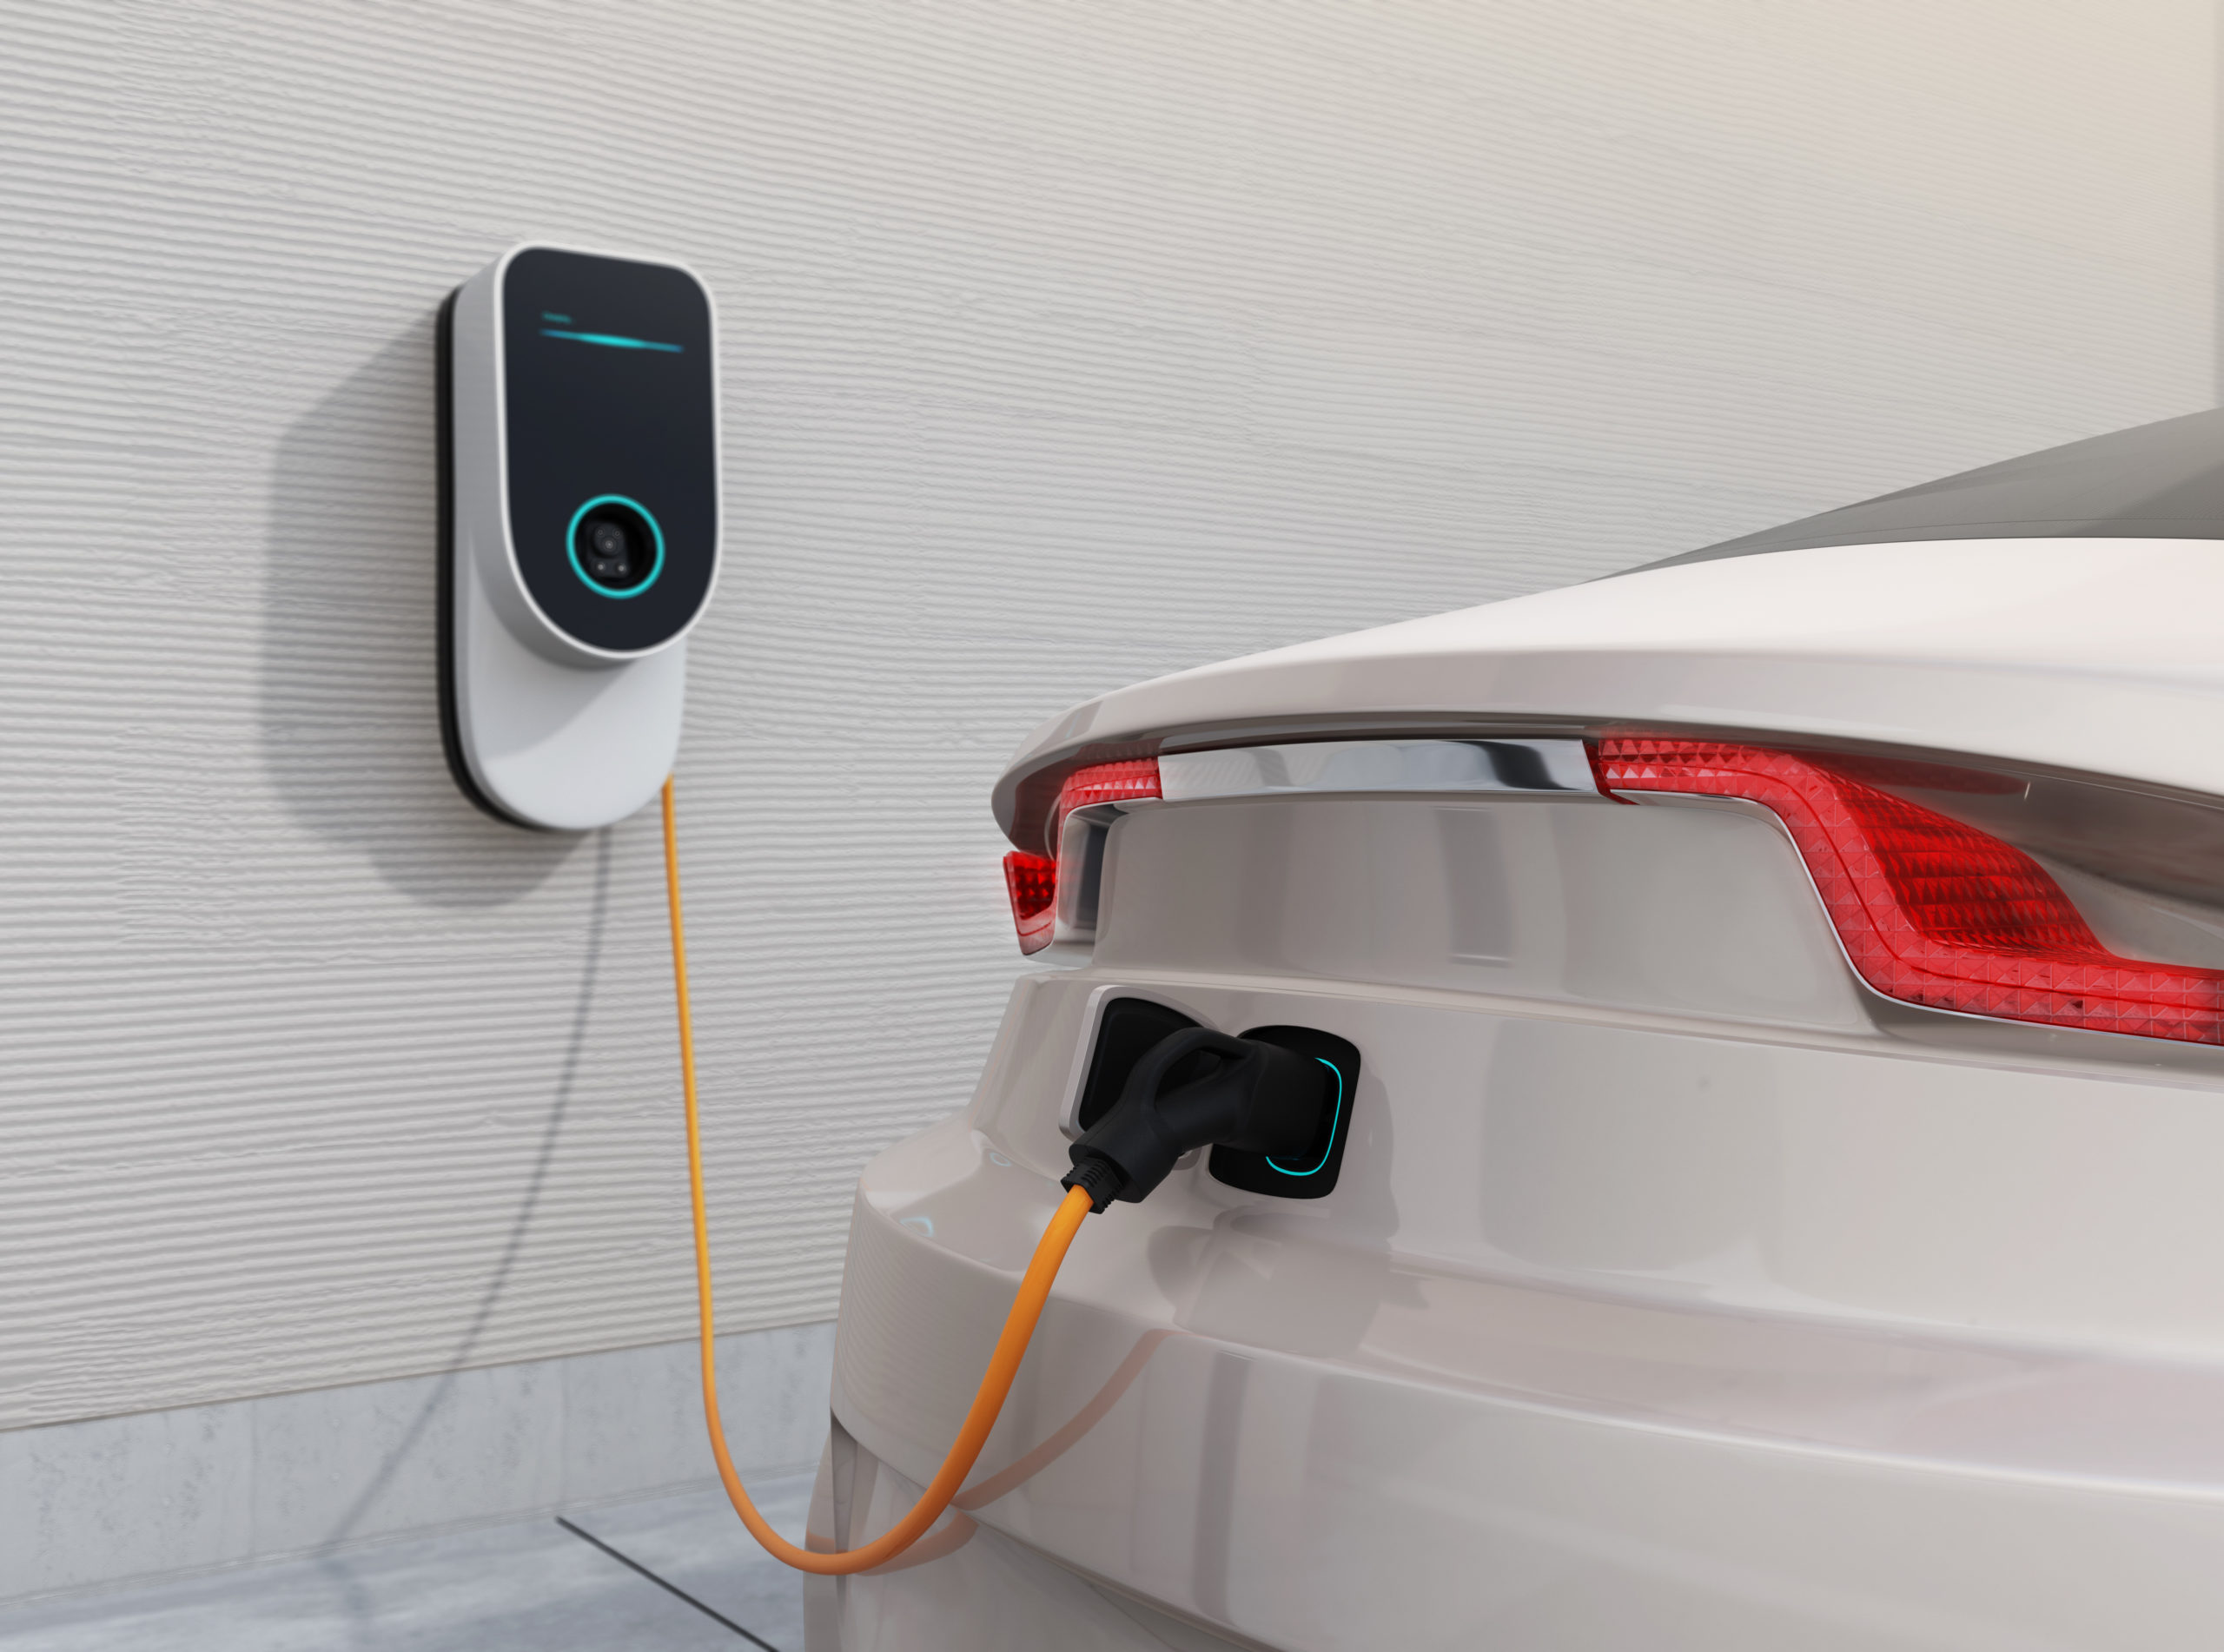 ev-home-chargers-in-salt-lake-city-vehicle-wall-charger